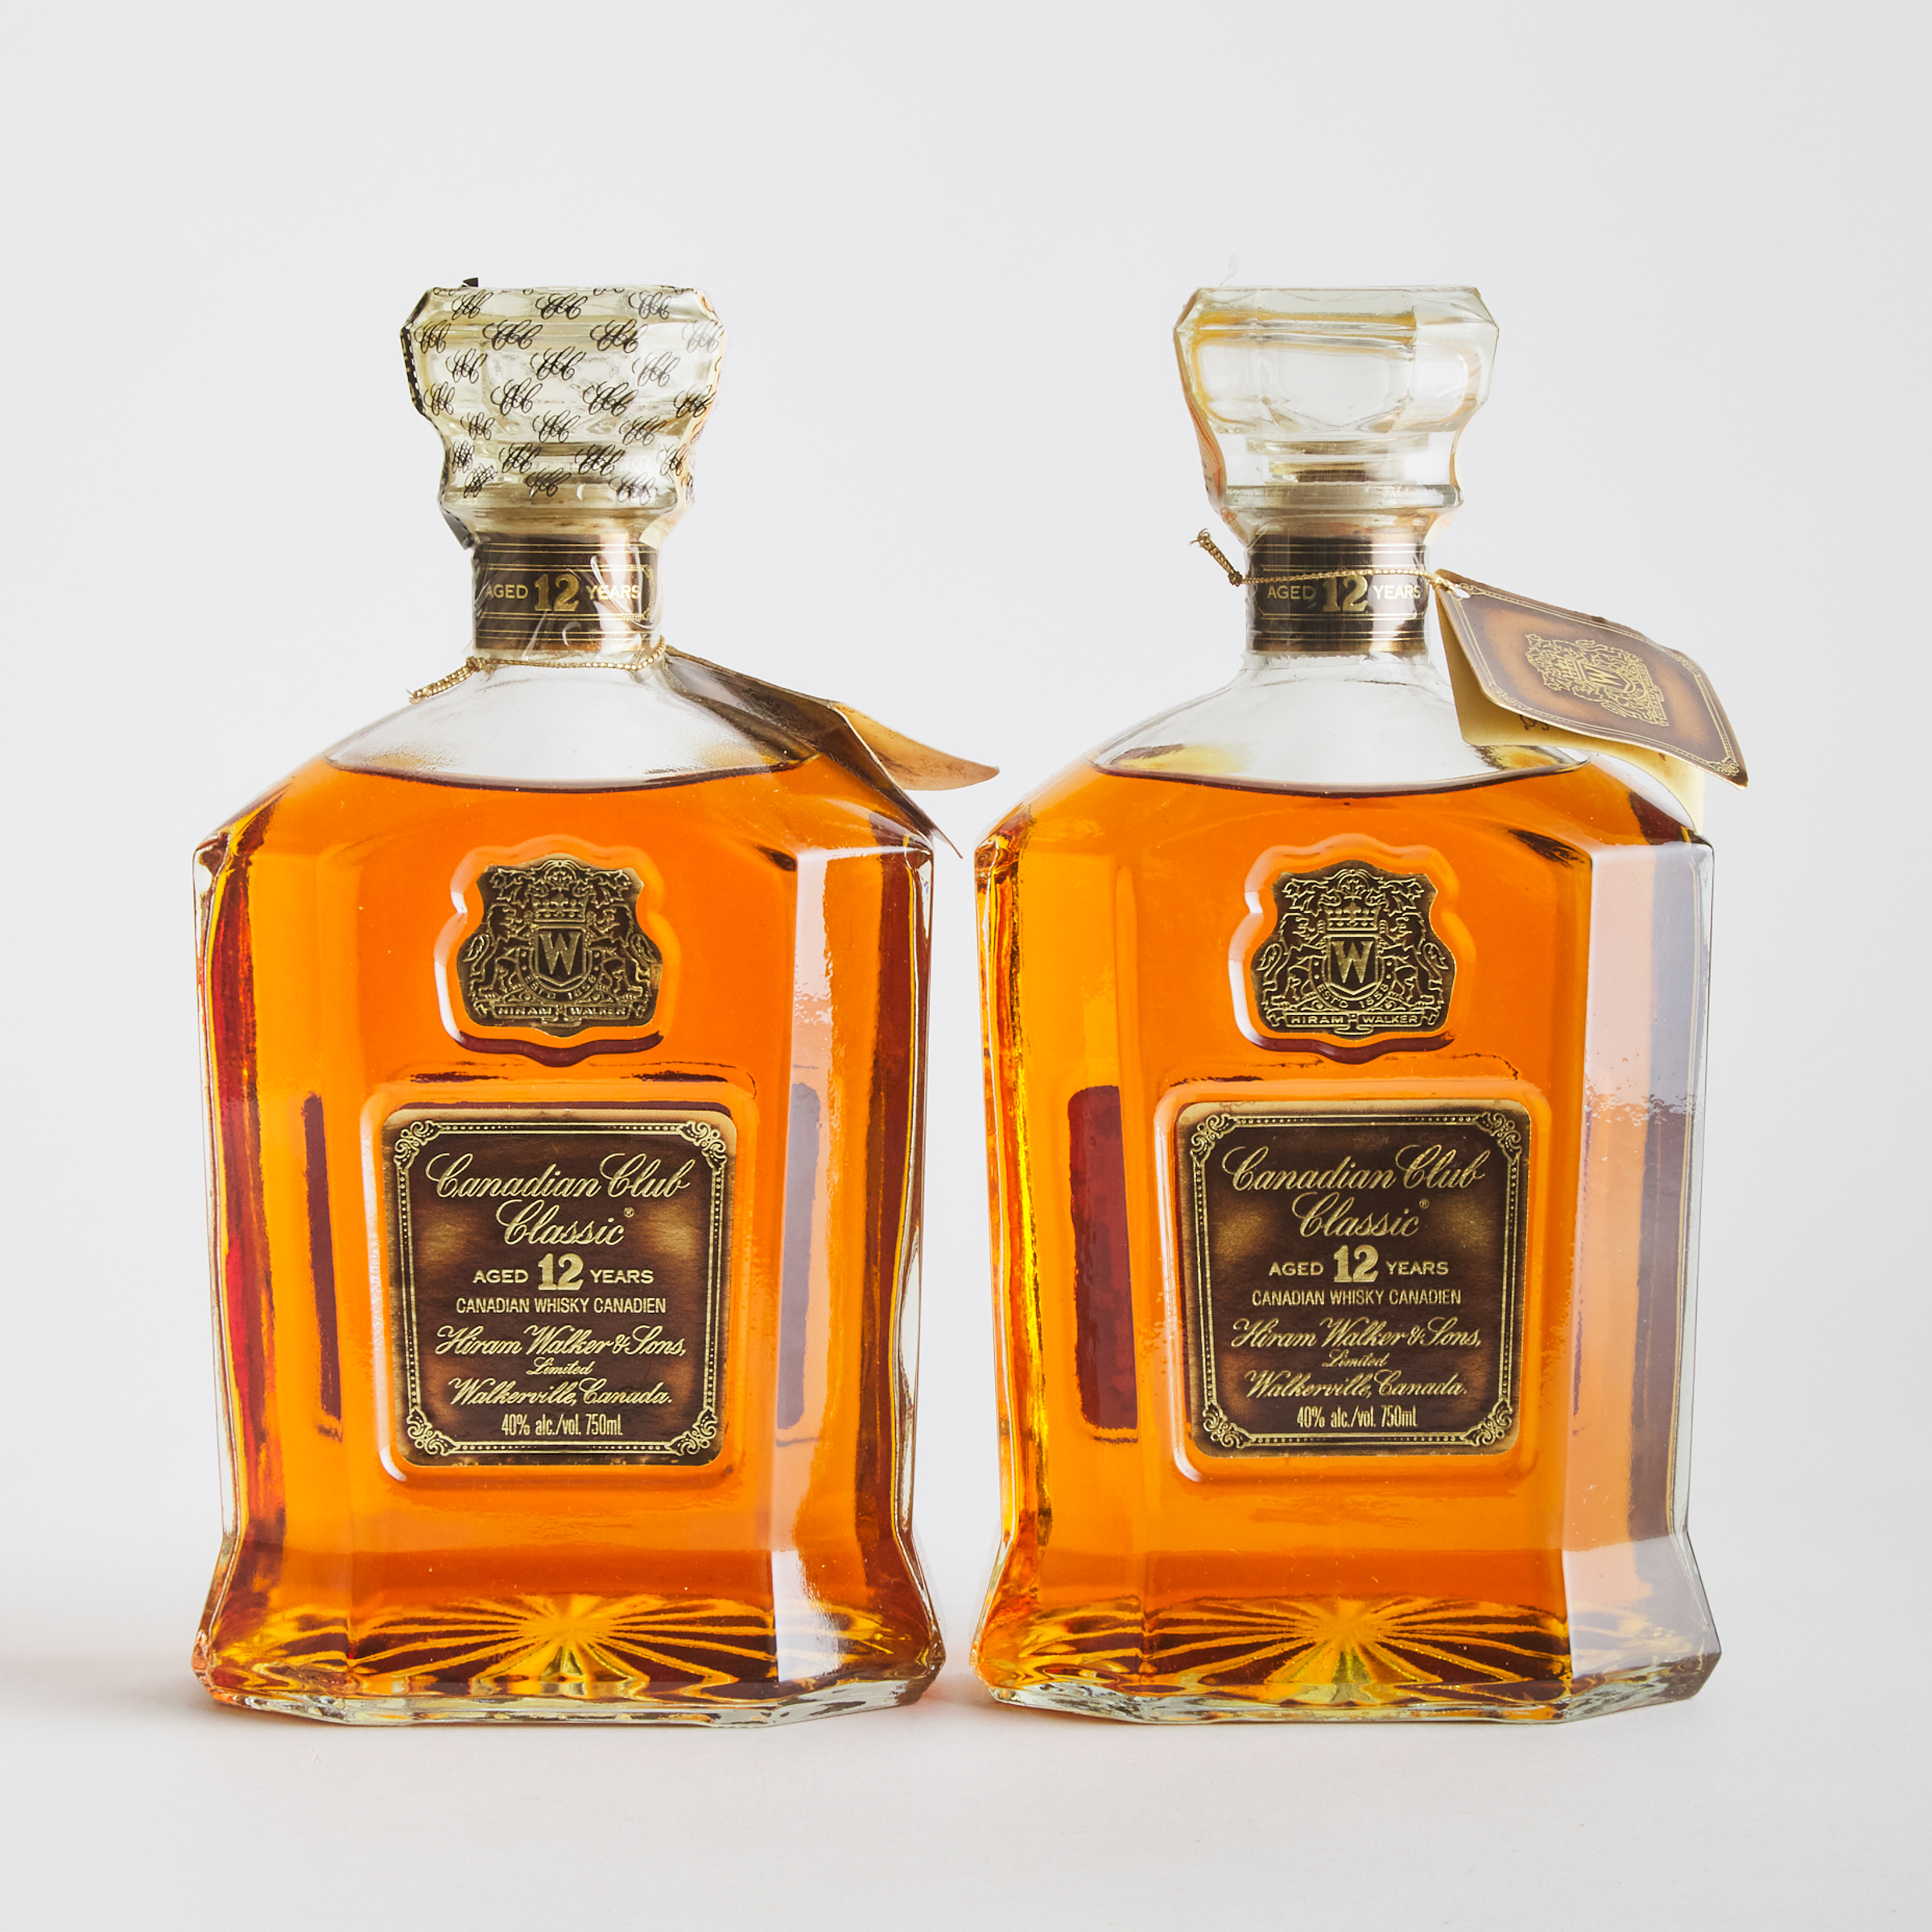 CANADIAN CLUB CLASSIC CANADIAN WHISKY 12 YEARS (ONE 750 ML)
CANADIAN CLUB CLASSIC CANADIAN WHISKY 12 YEARS (ONE 750 ML)